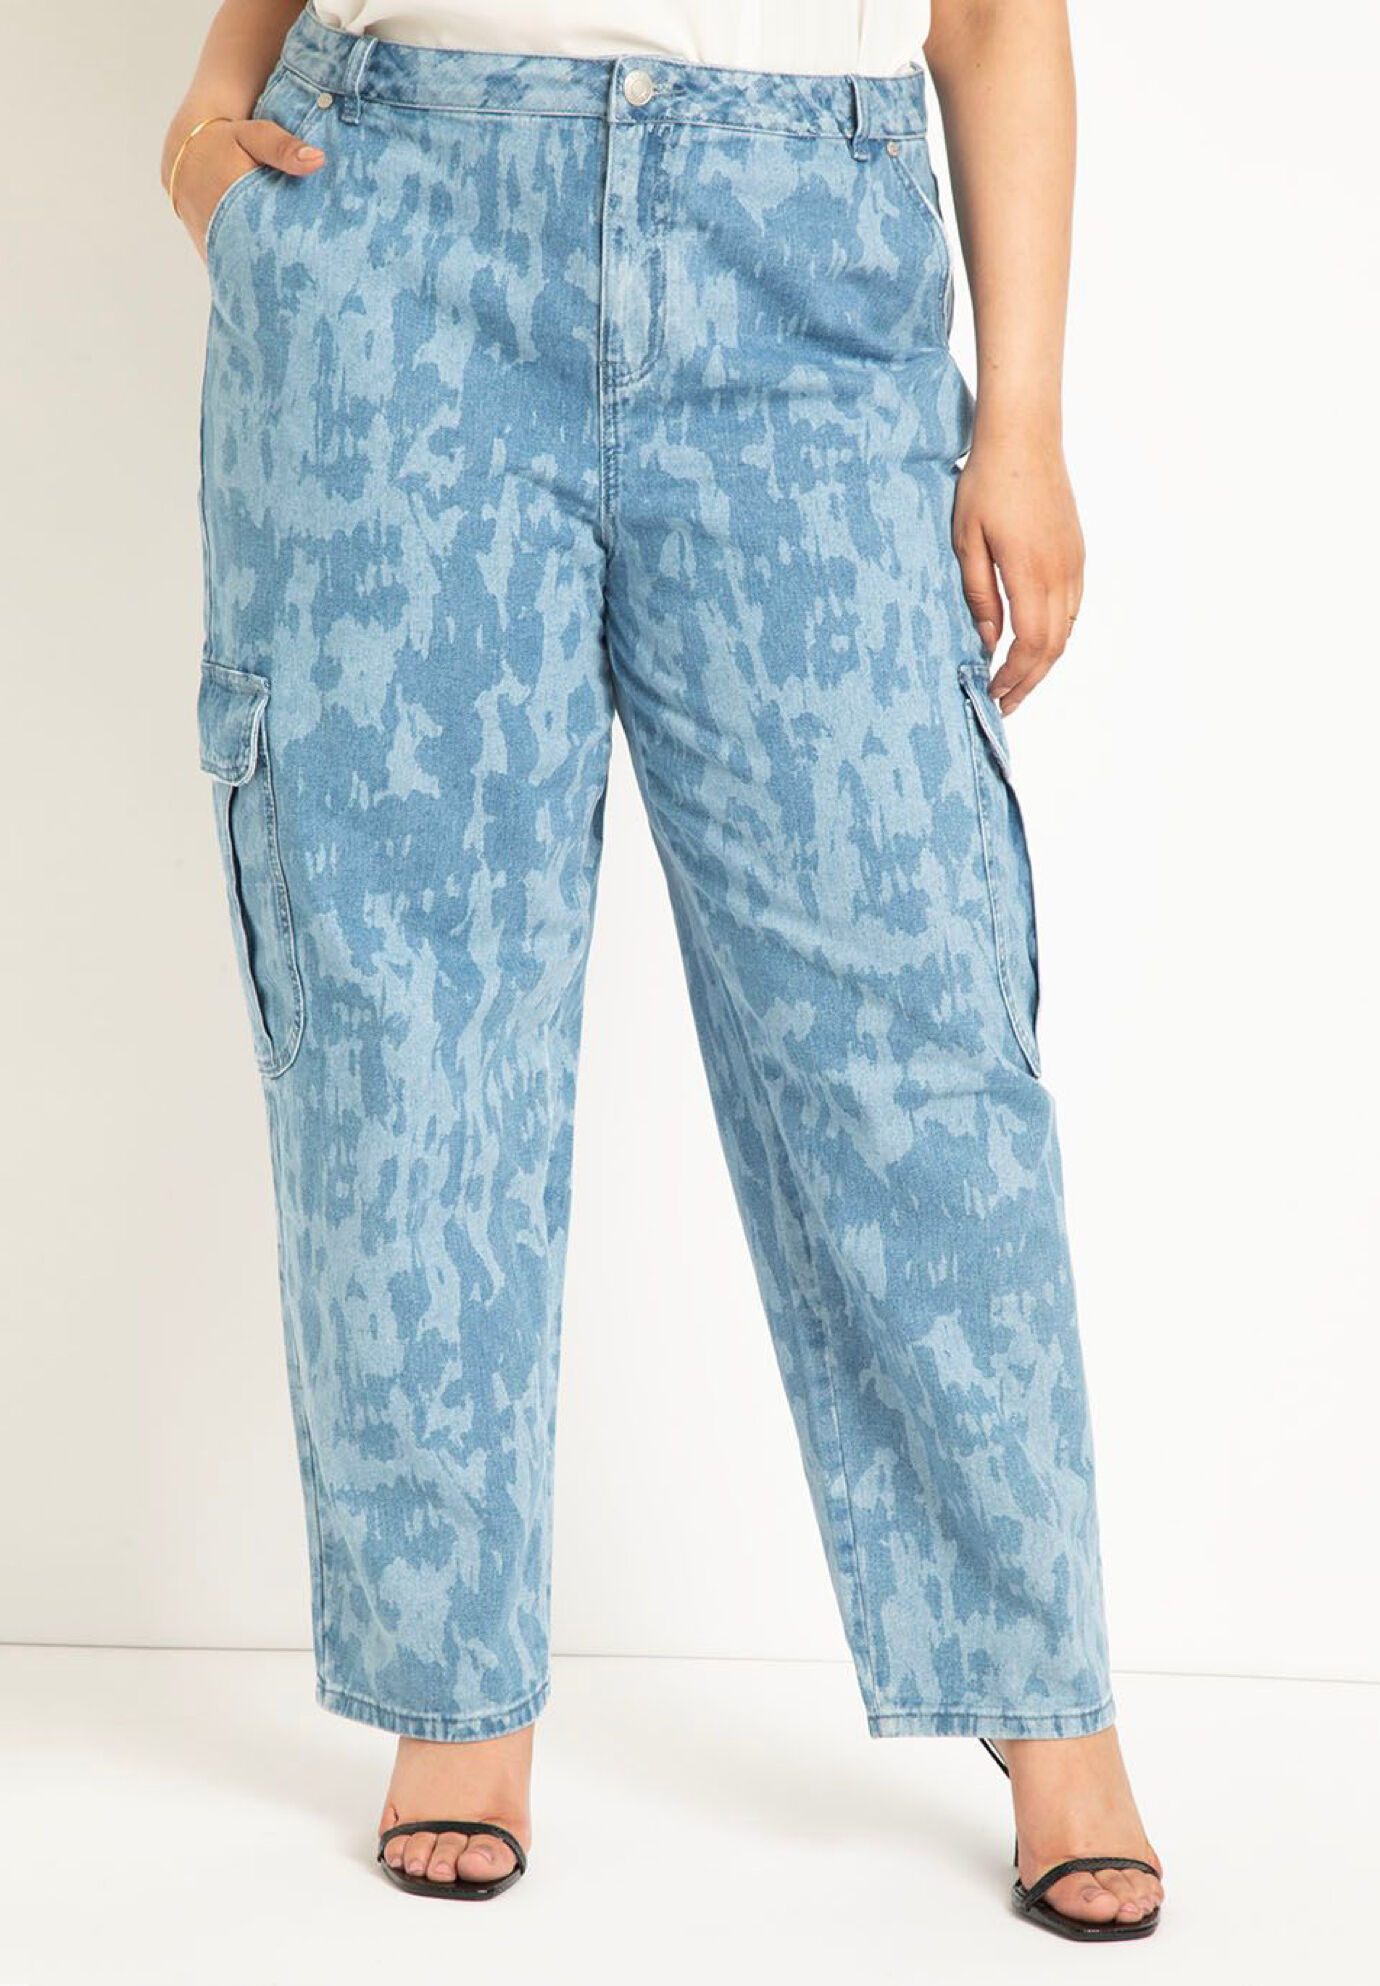 Plus Size Women Printed Cargo Jean By ( Size 16 )